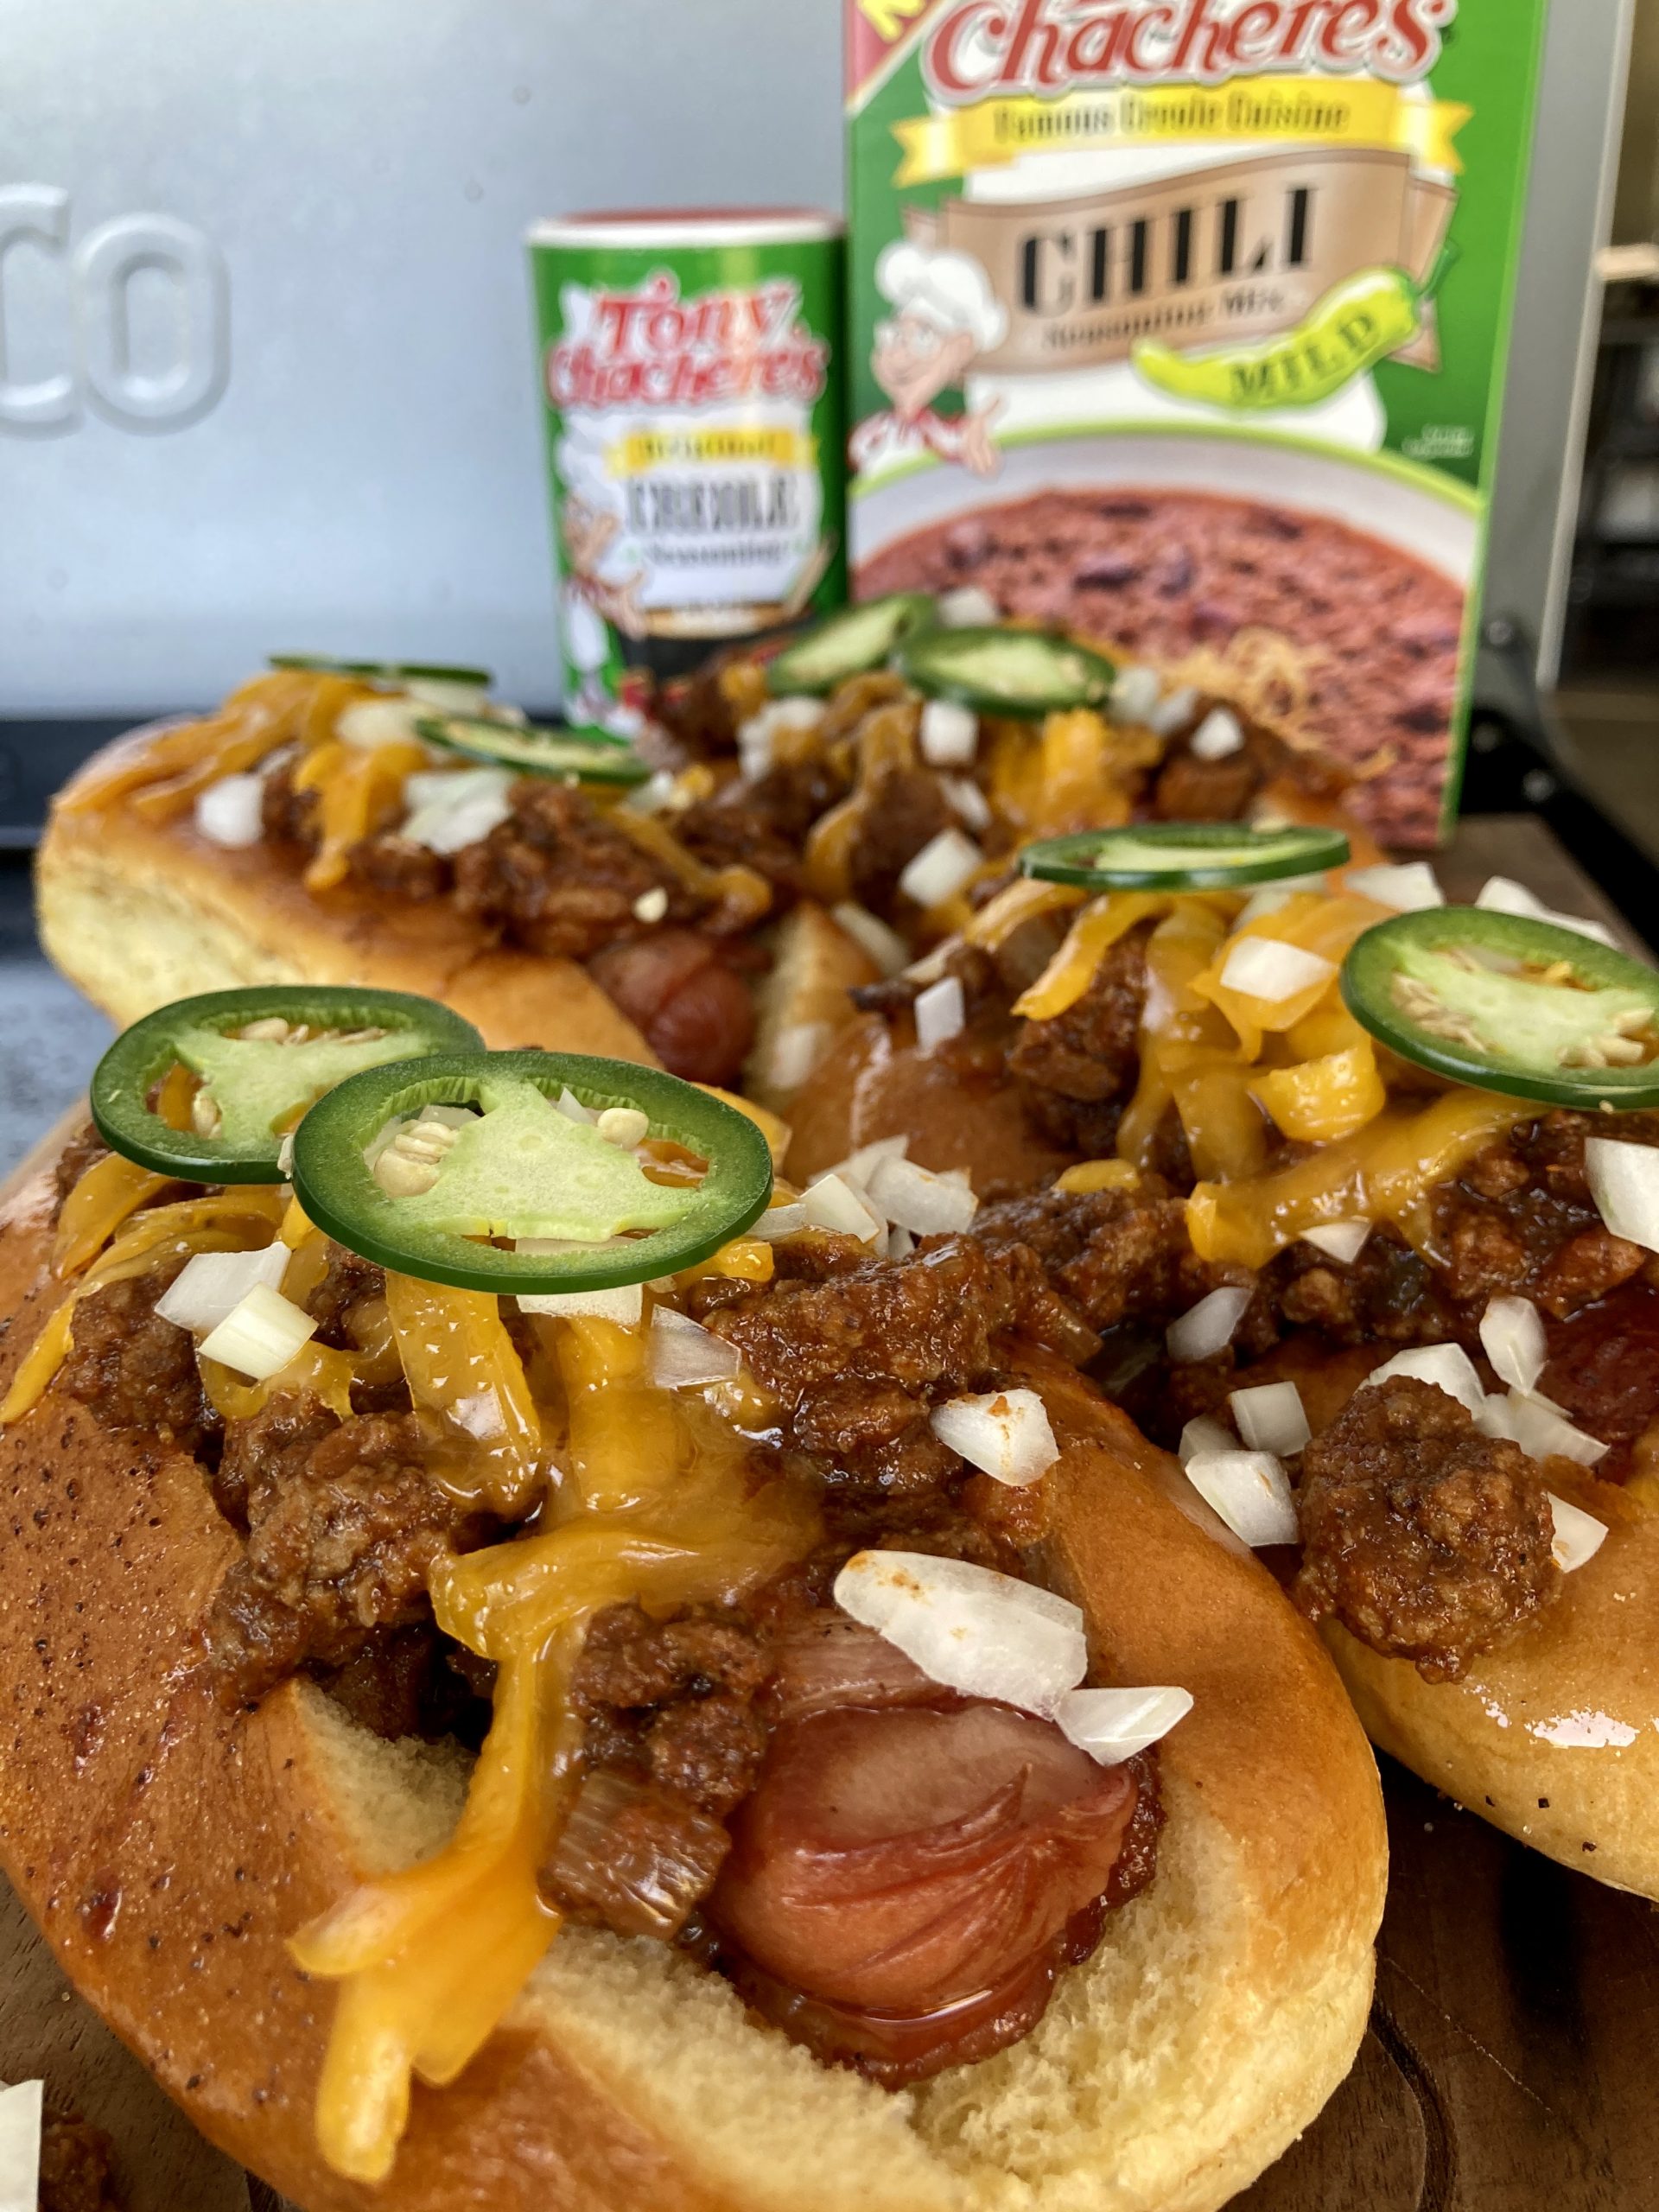 Bacon Wrapped Chili Cheese Dogs